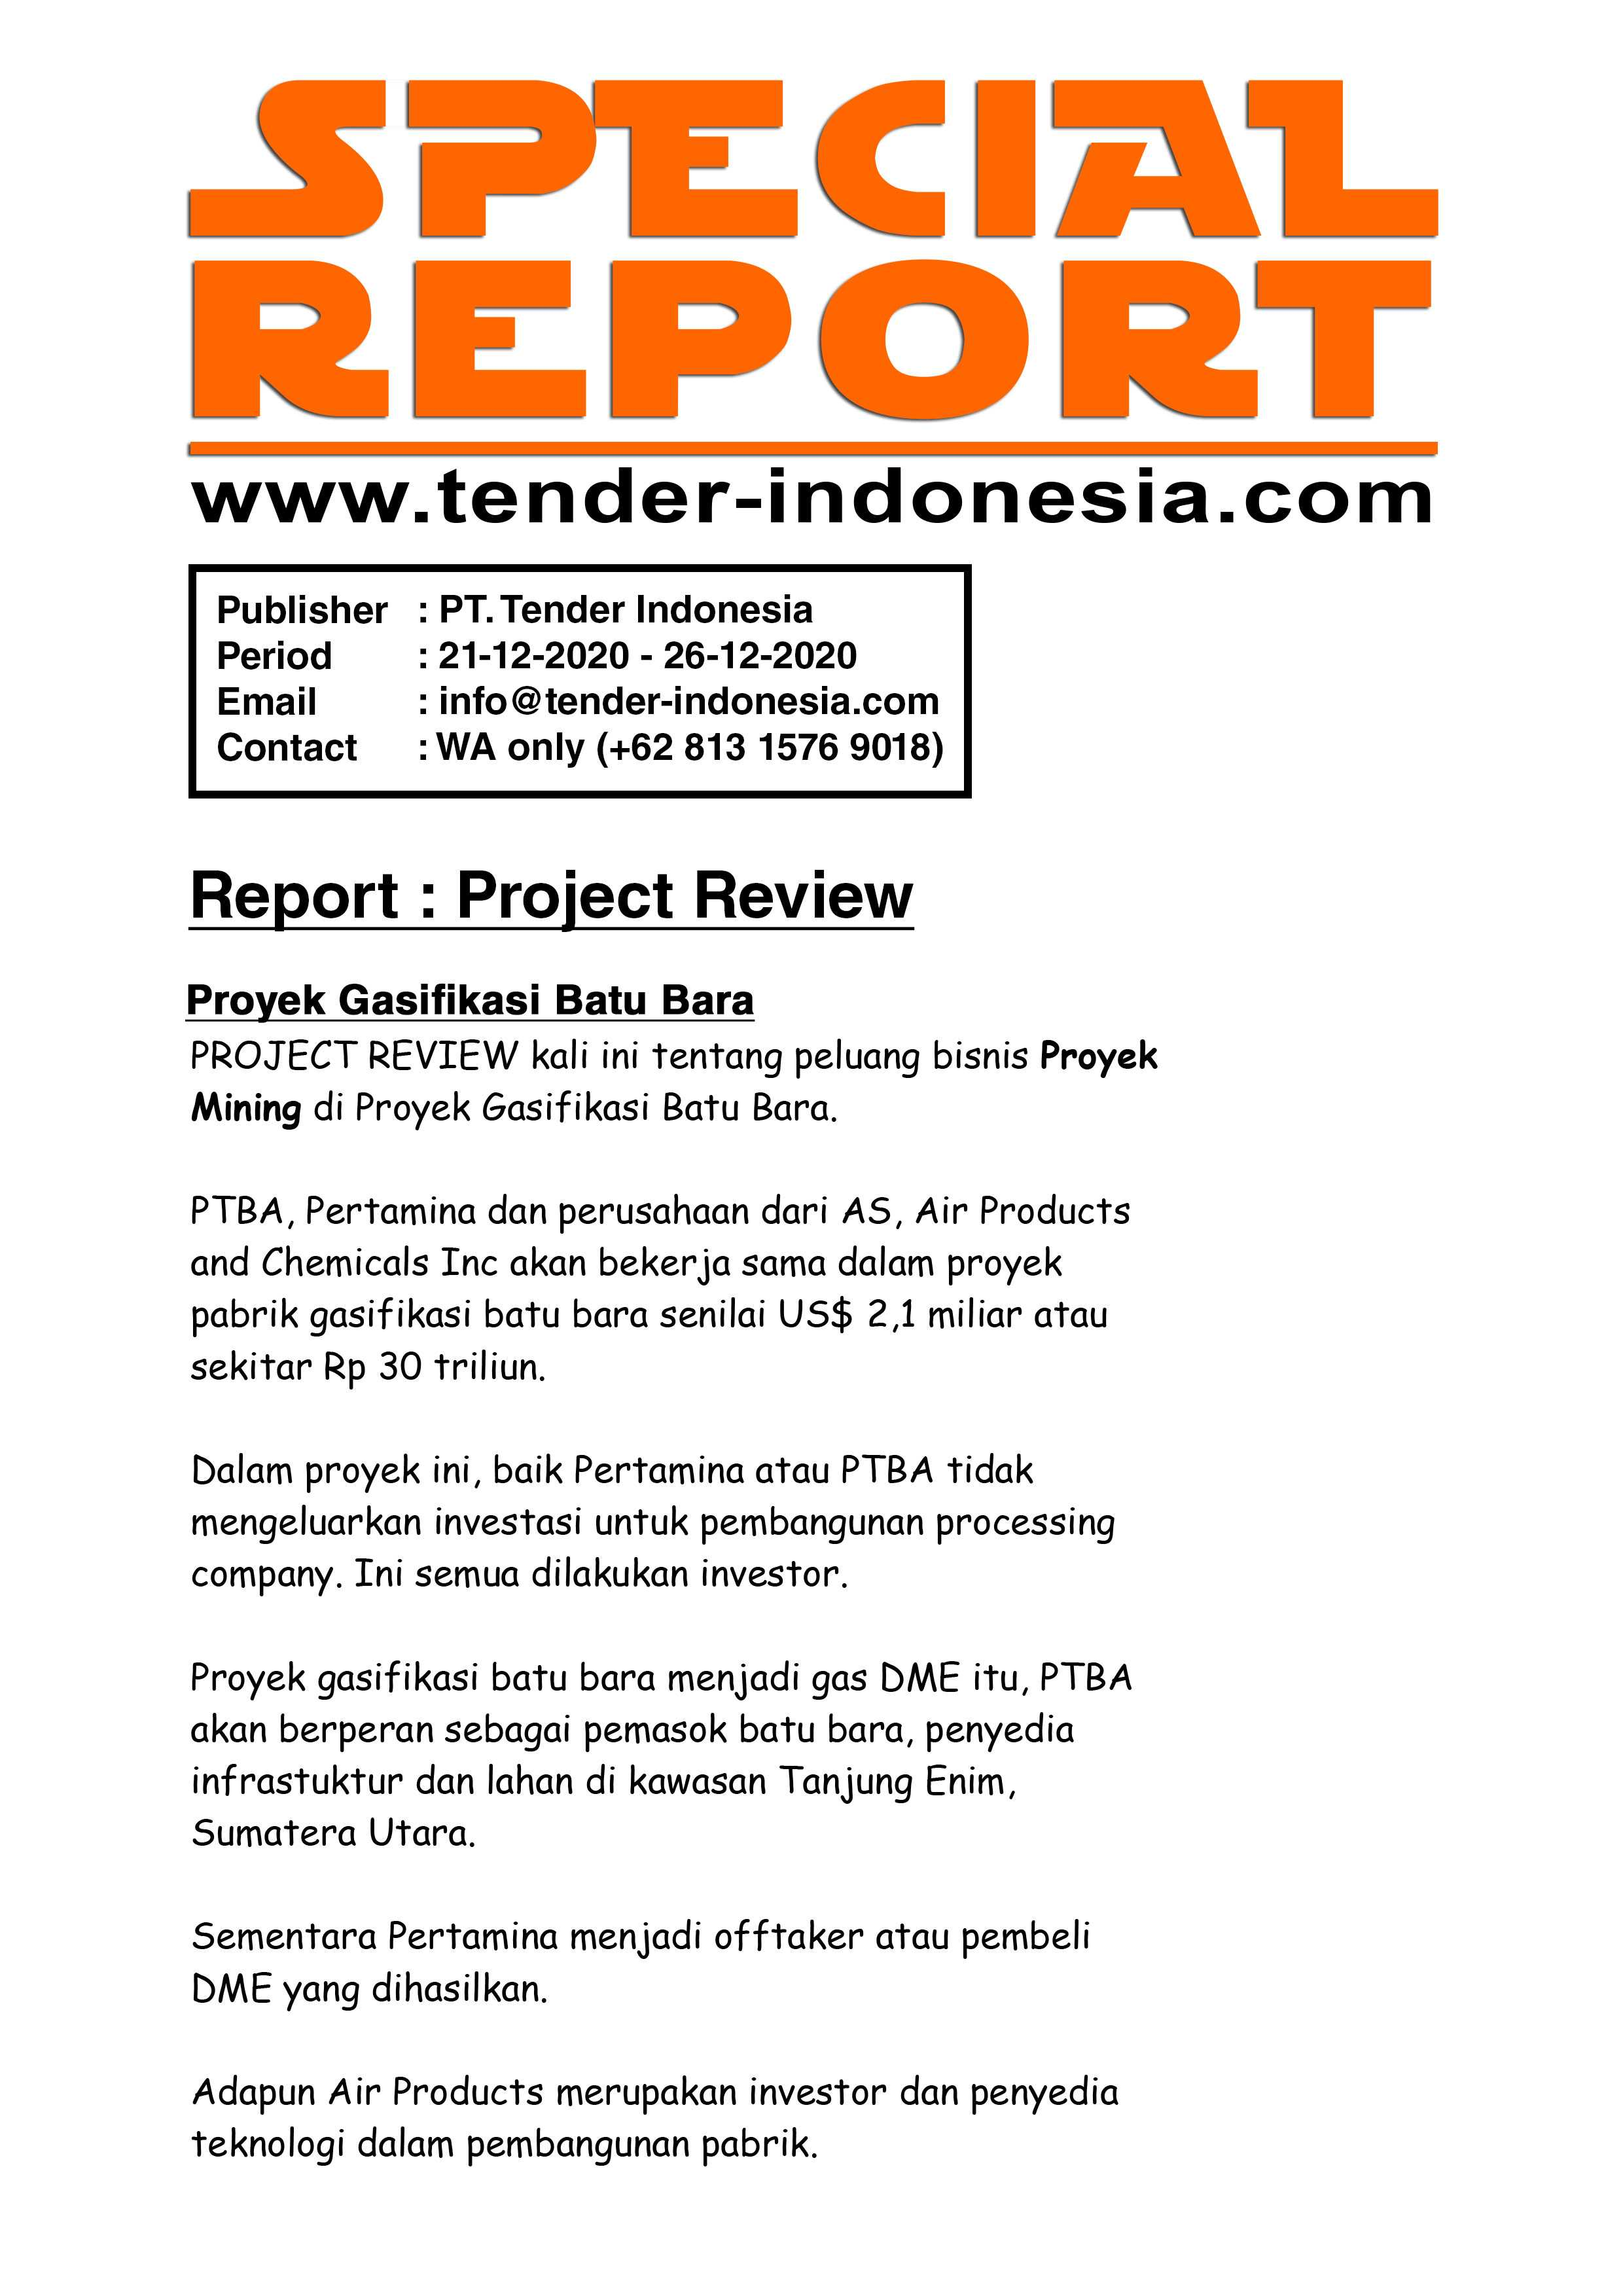 Weekly Project Review (Edisi 21 Desember - 26 Desember 2020)